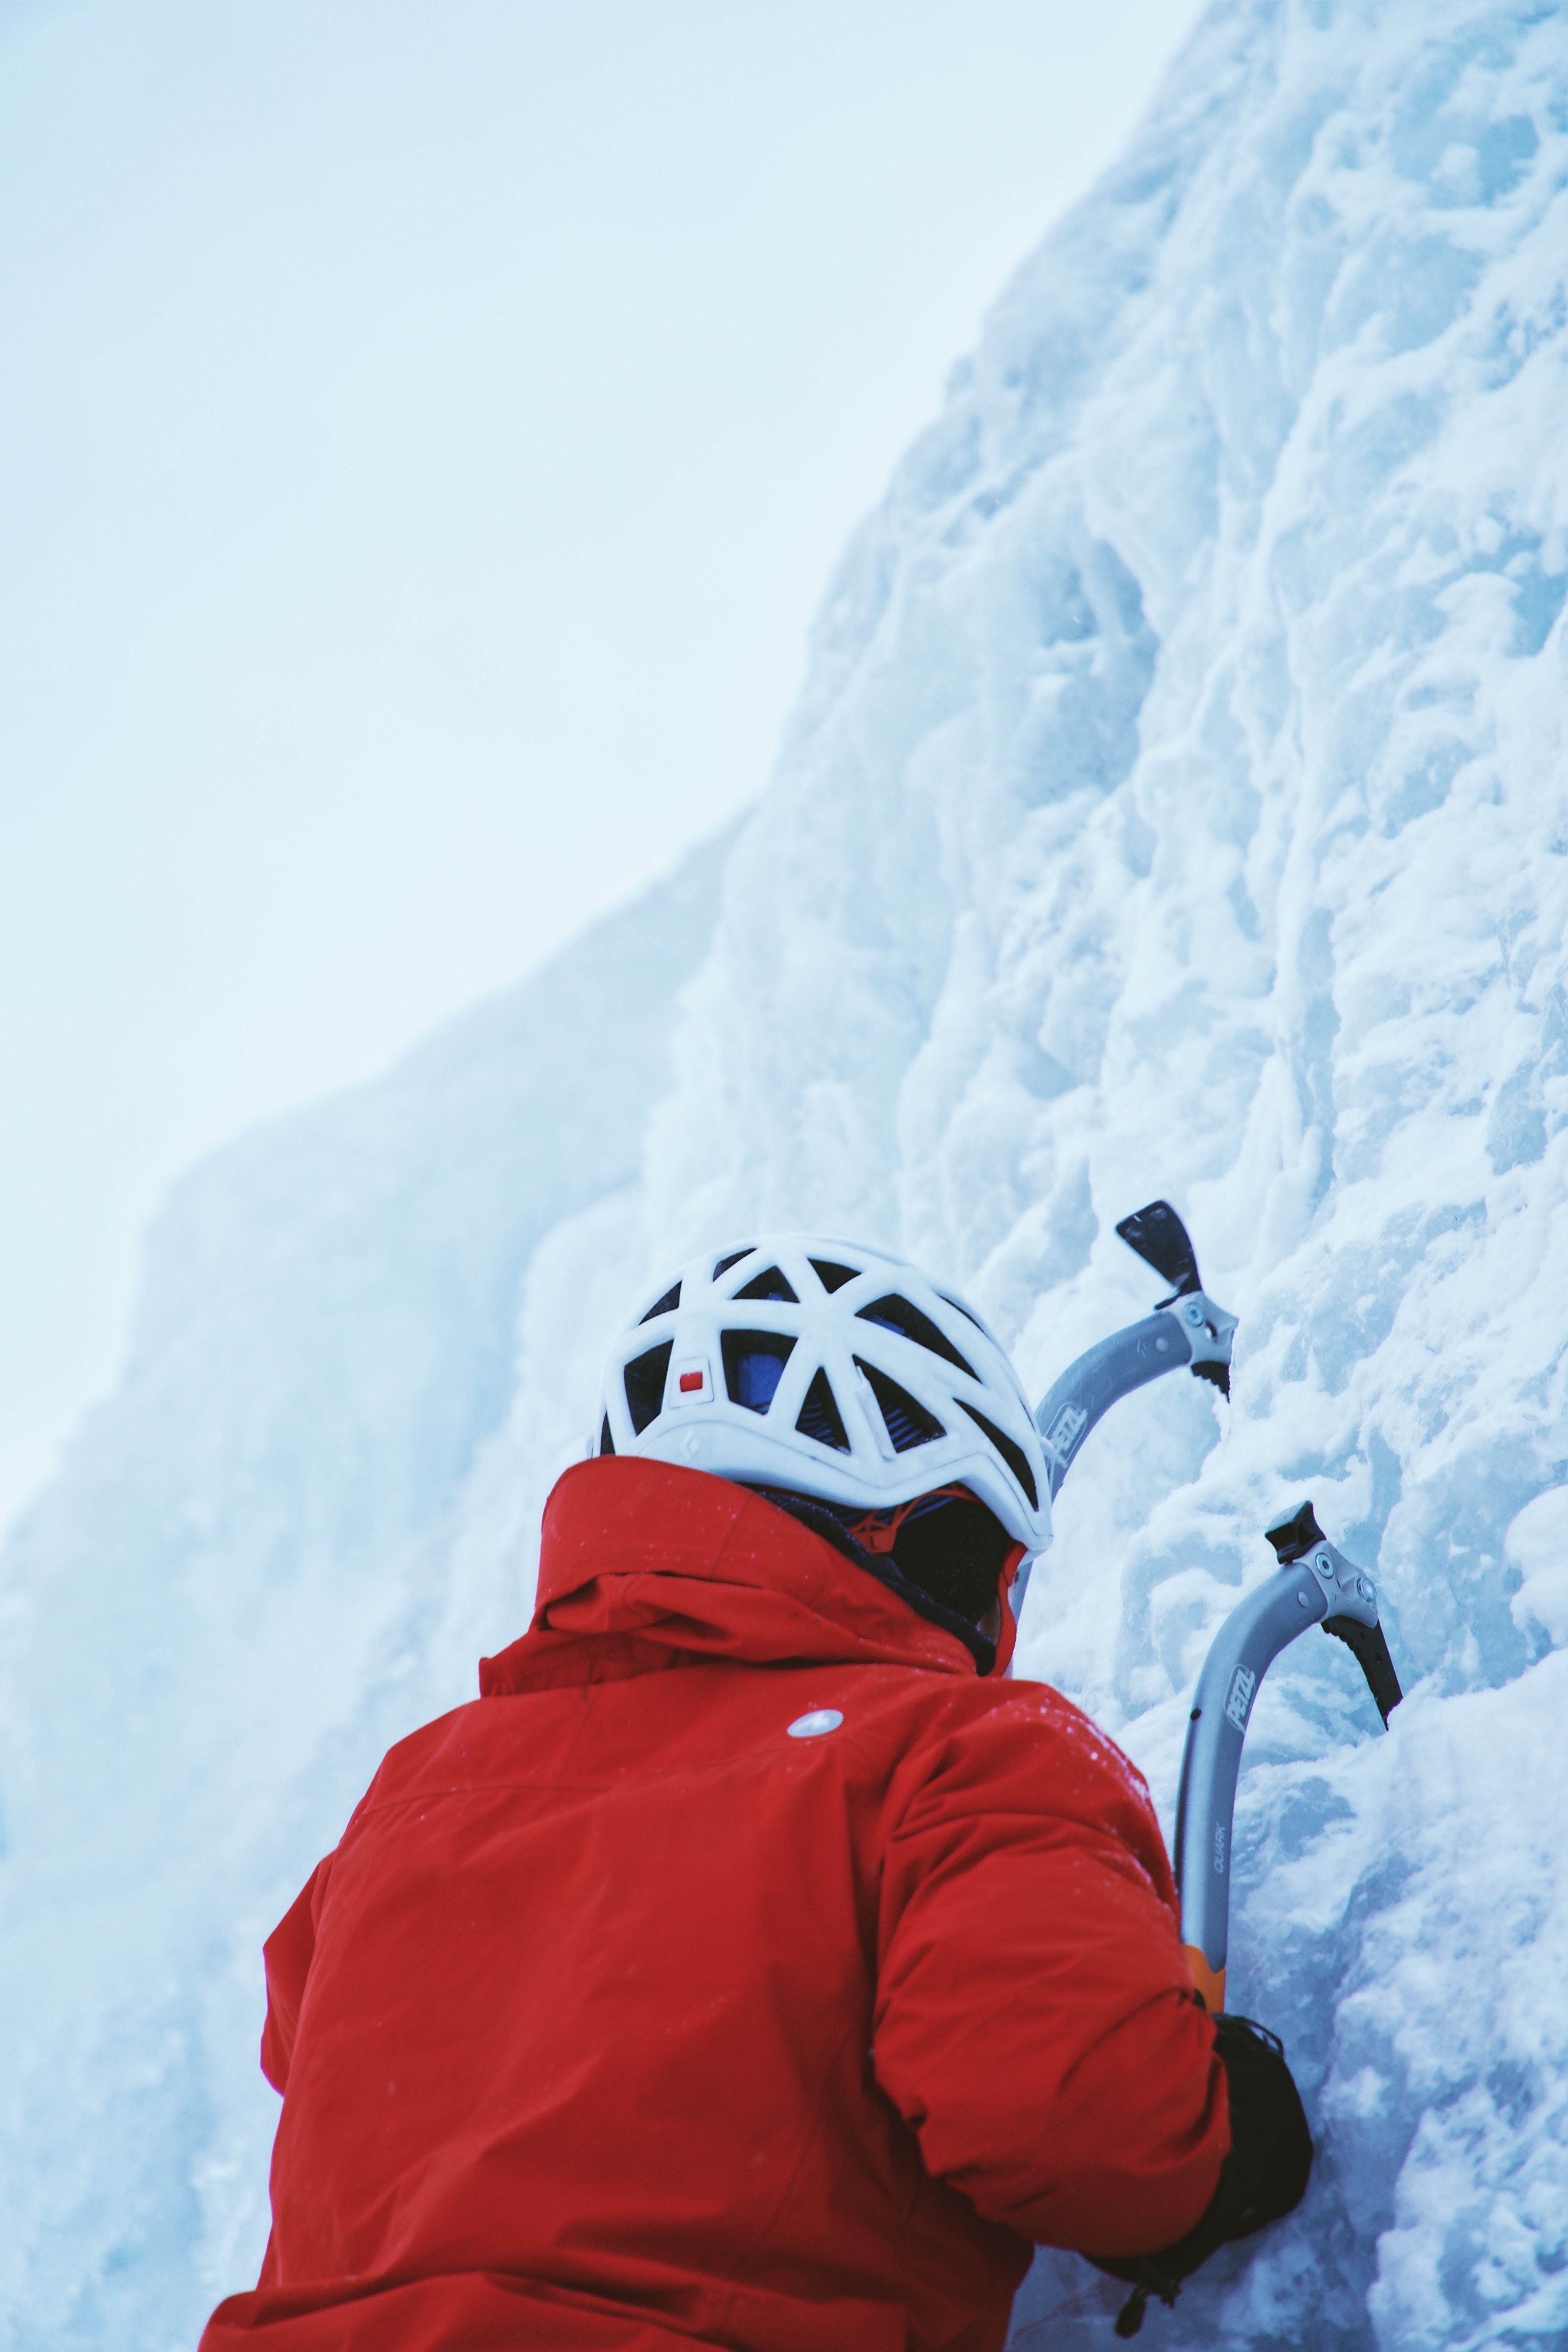 Person using ice pics to climb up the side of a snowy mountain